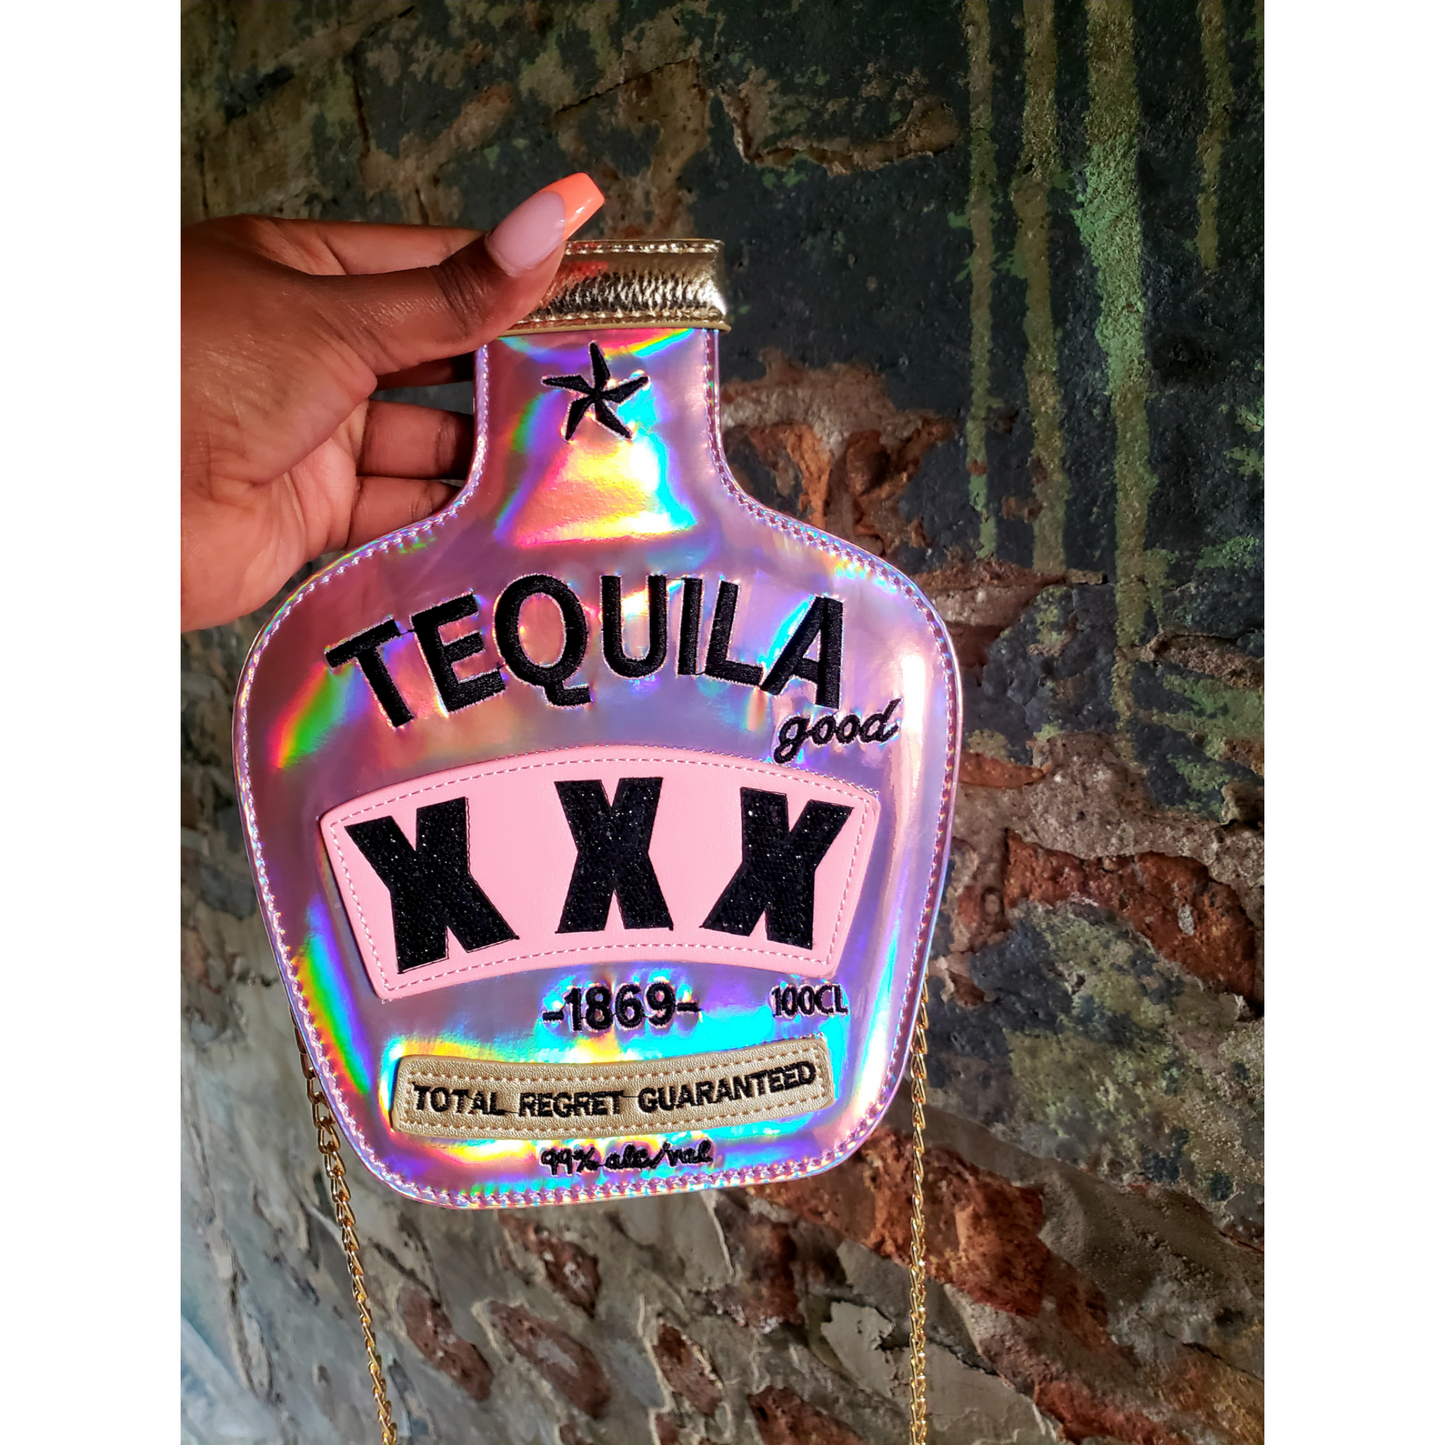 Tequila Clutch (2 Options)